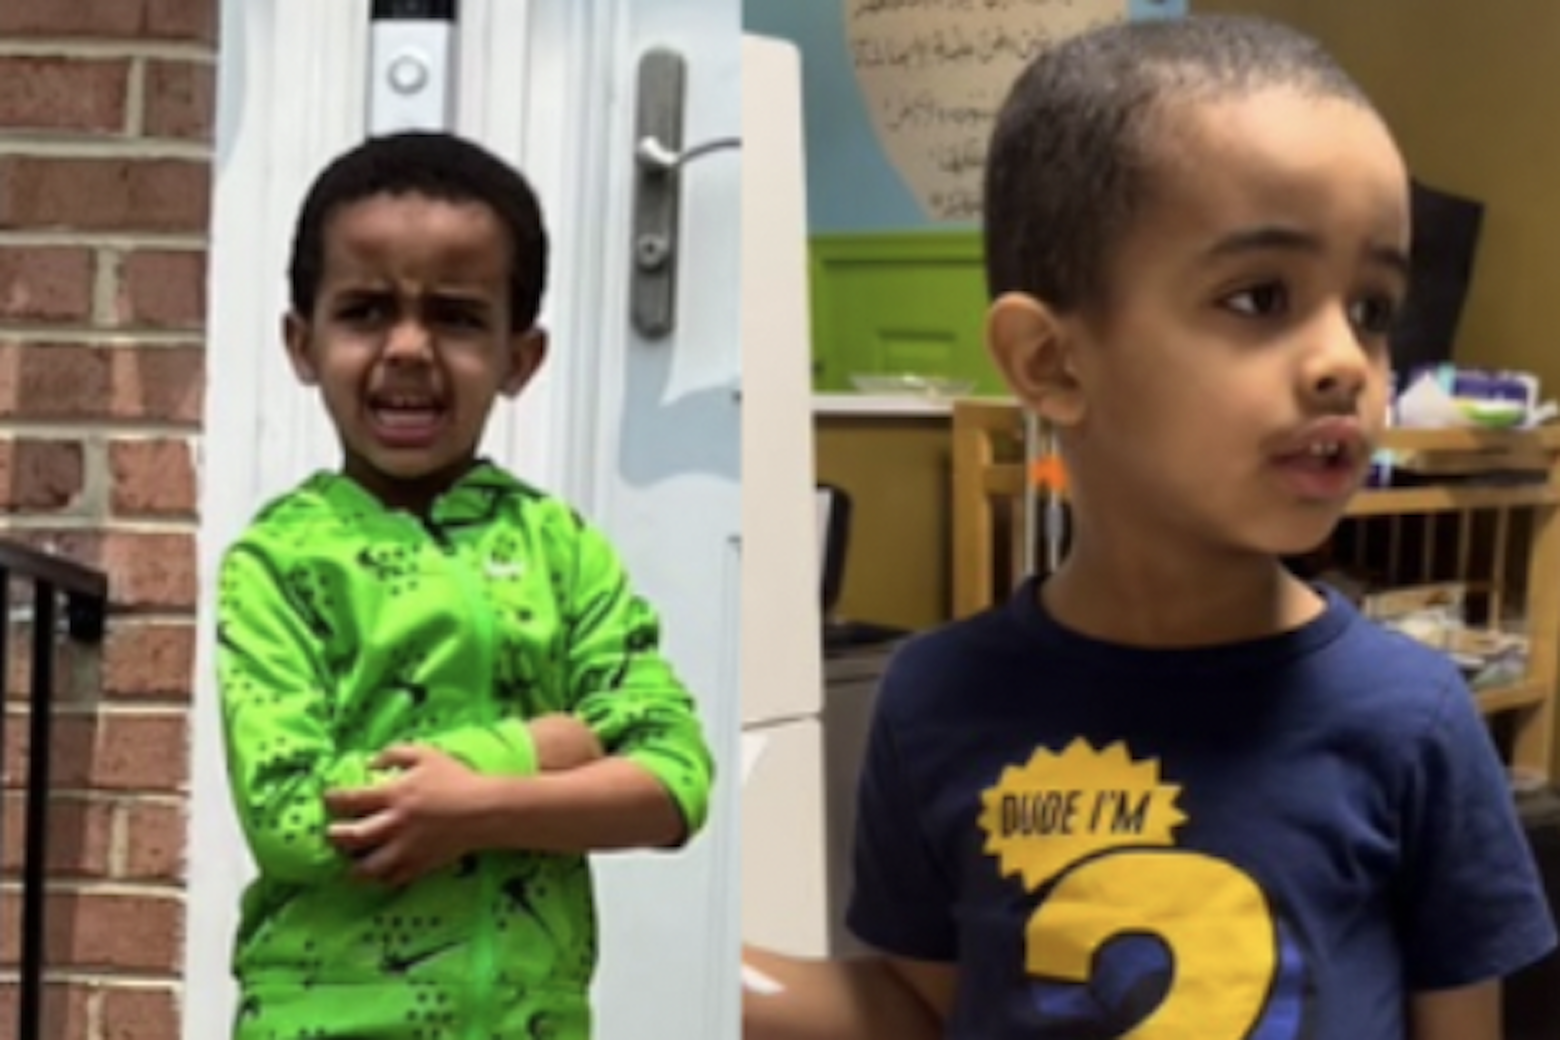 ‘We will carry Fawzan in our hearts’: Community mourns 6-year-old boy found dead in Gaithersburg park pond - WTOP News